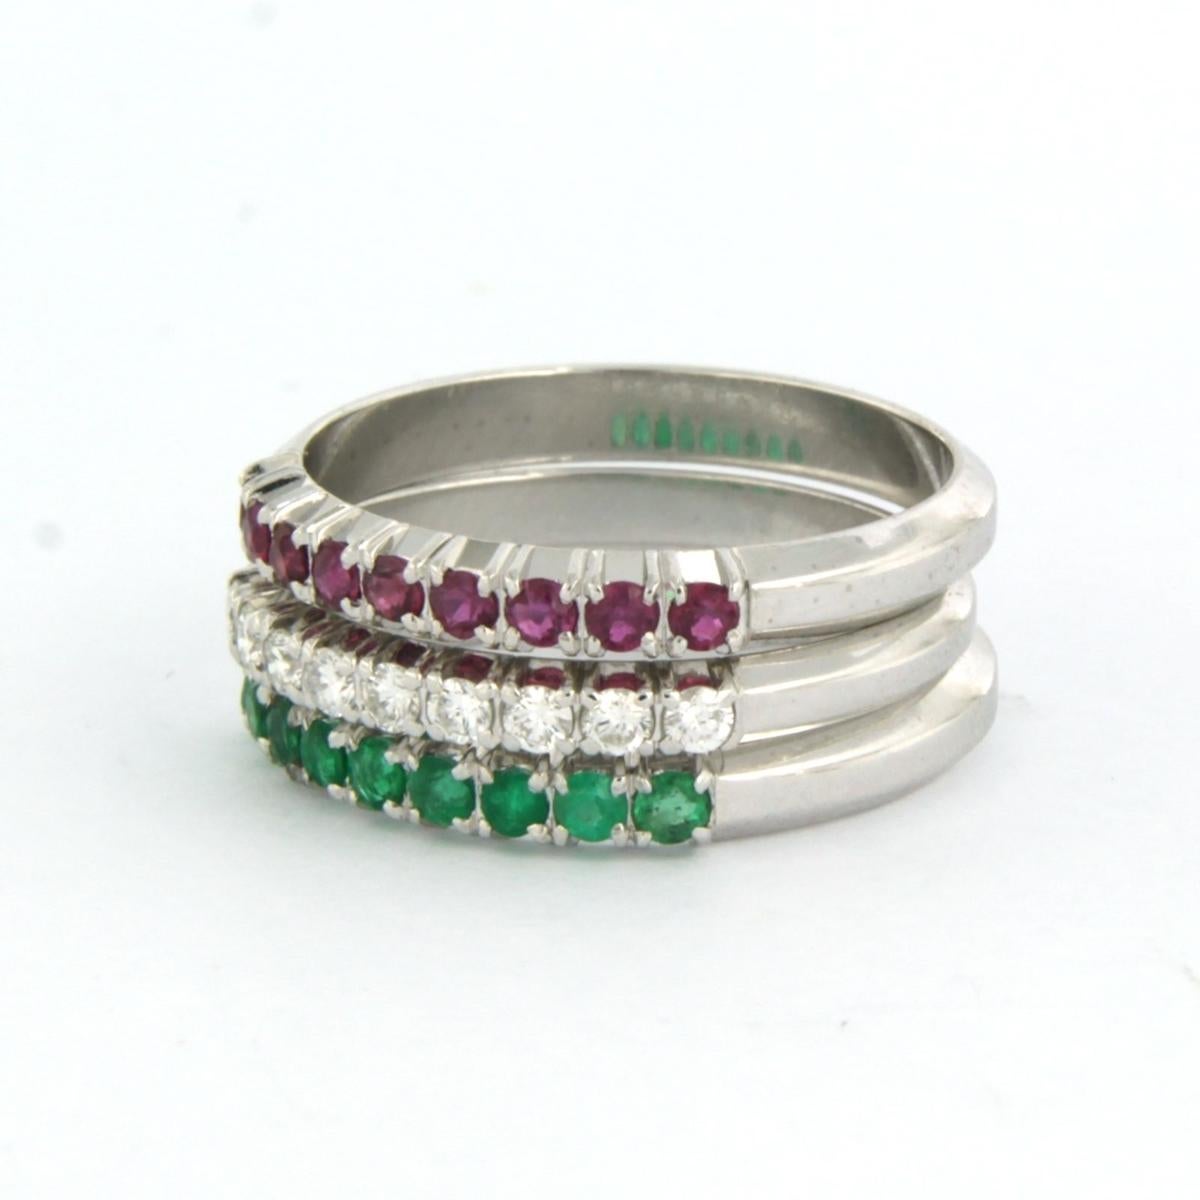 set of three ring set with ruby, emerald and brilliant cut diamond. 0.24ct - F/G - VS/SI - ring size U.S. 7 - EU. 17.25(54)

detailed description:

The total width of the set of rings is 8.2 mm wide

each ring is approximately 2.7 mm wide

Ring size